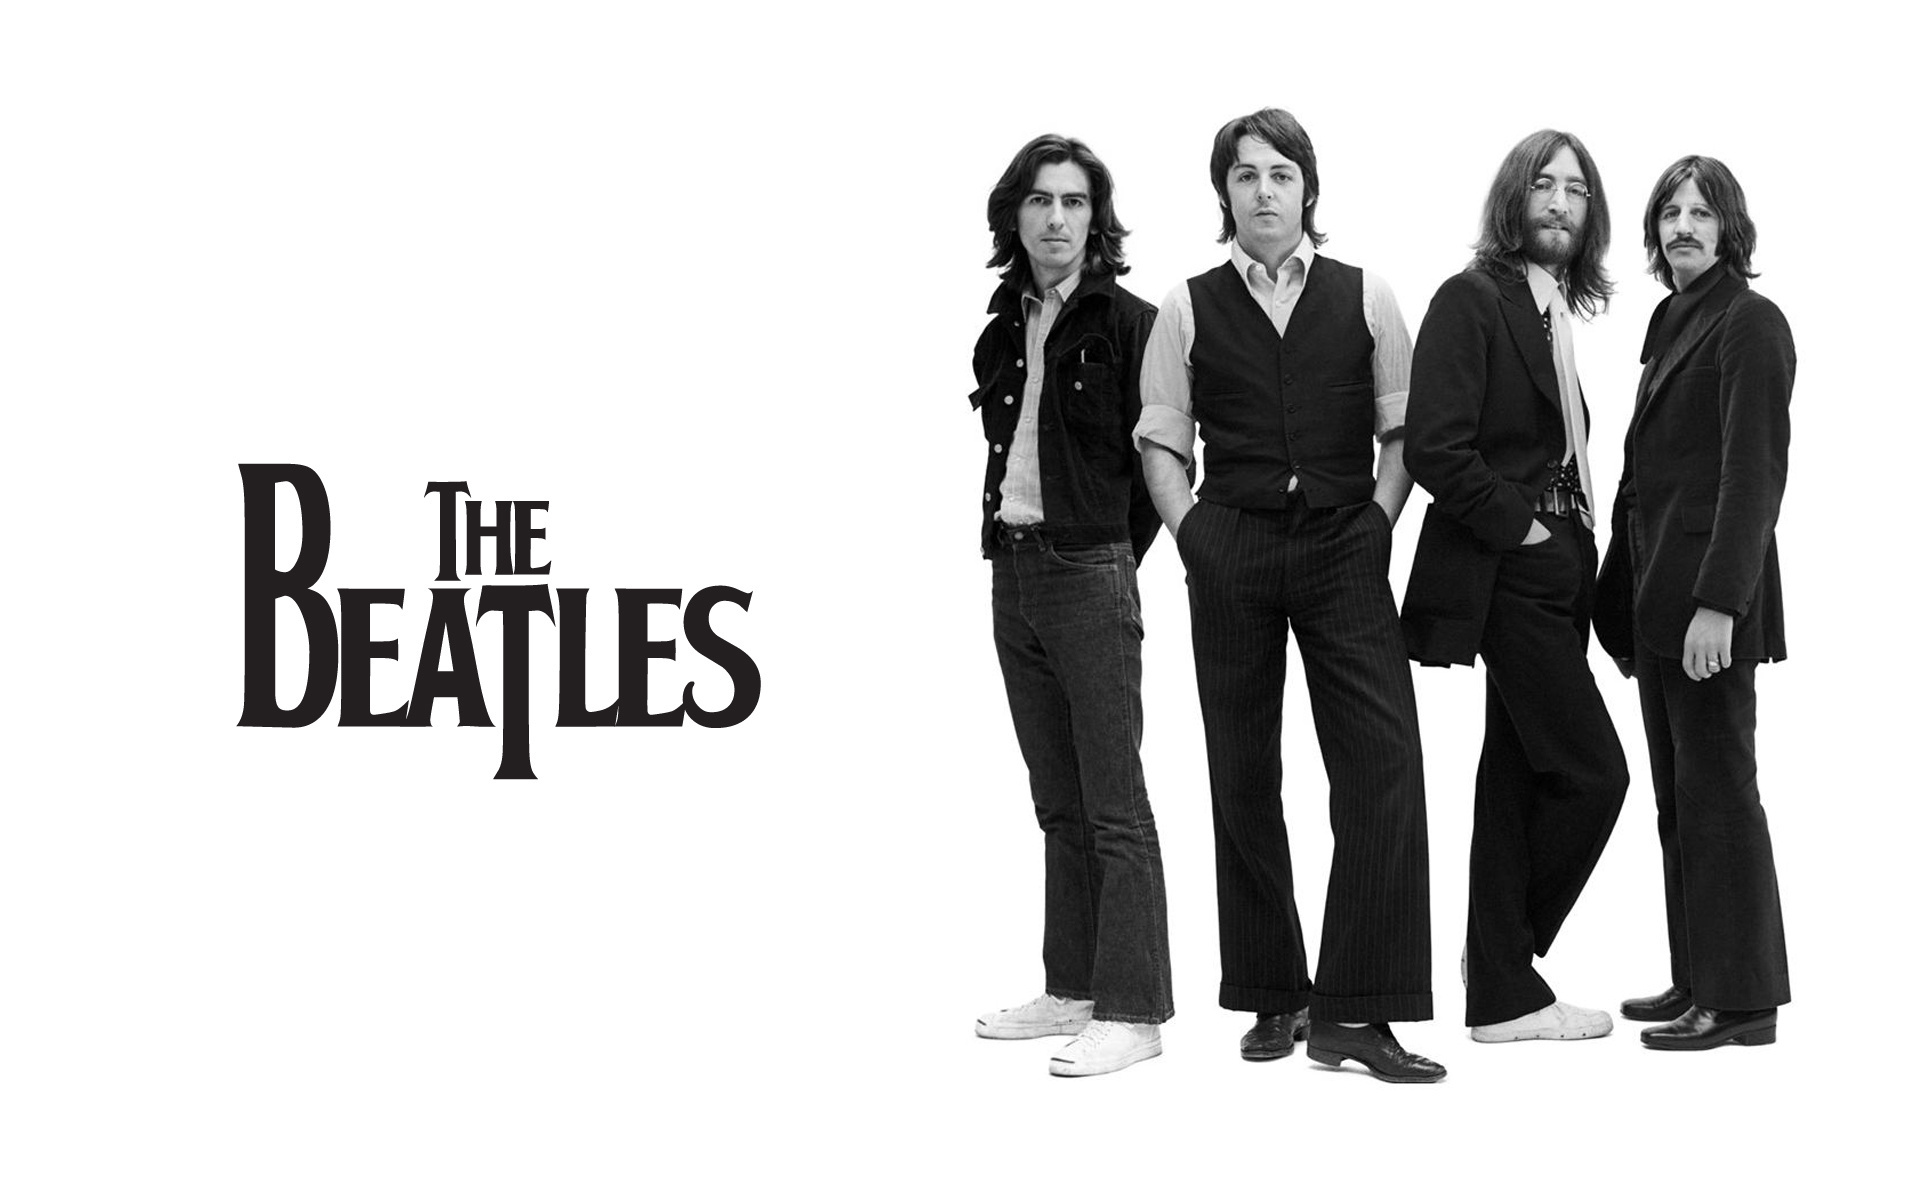 The beatles songs download free